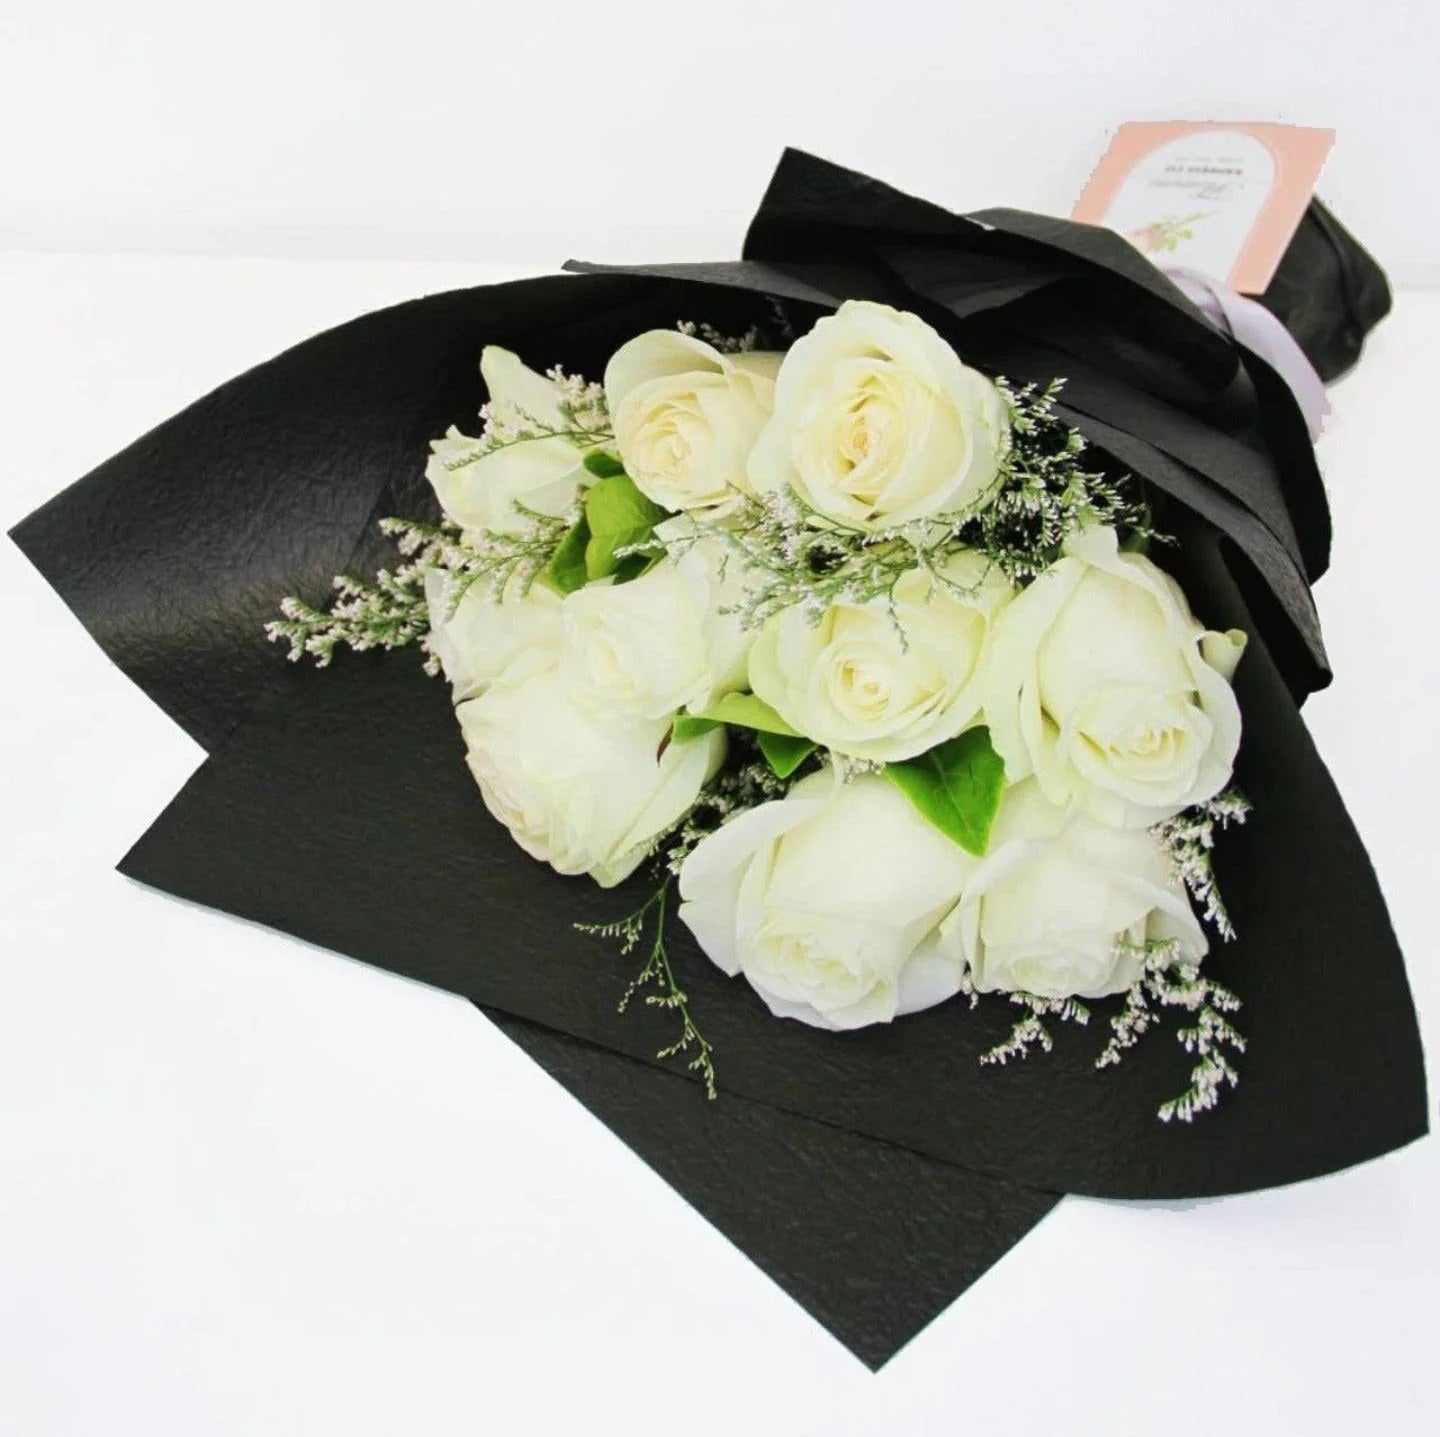 our professional florist in north melbourne